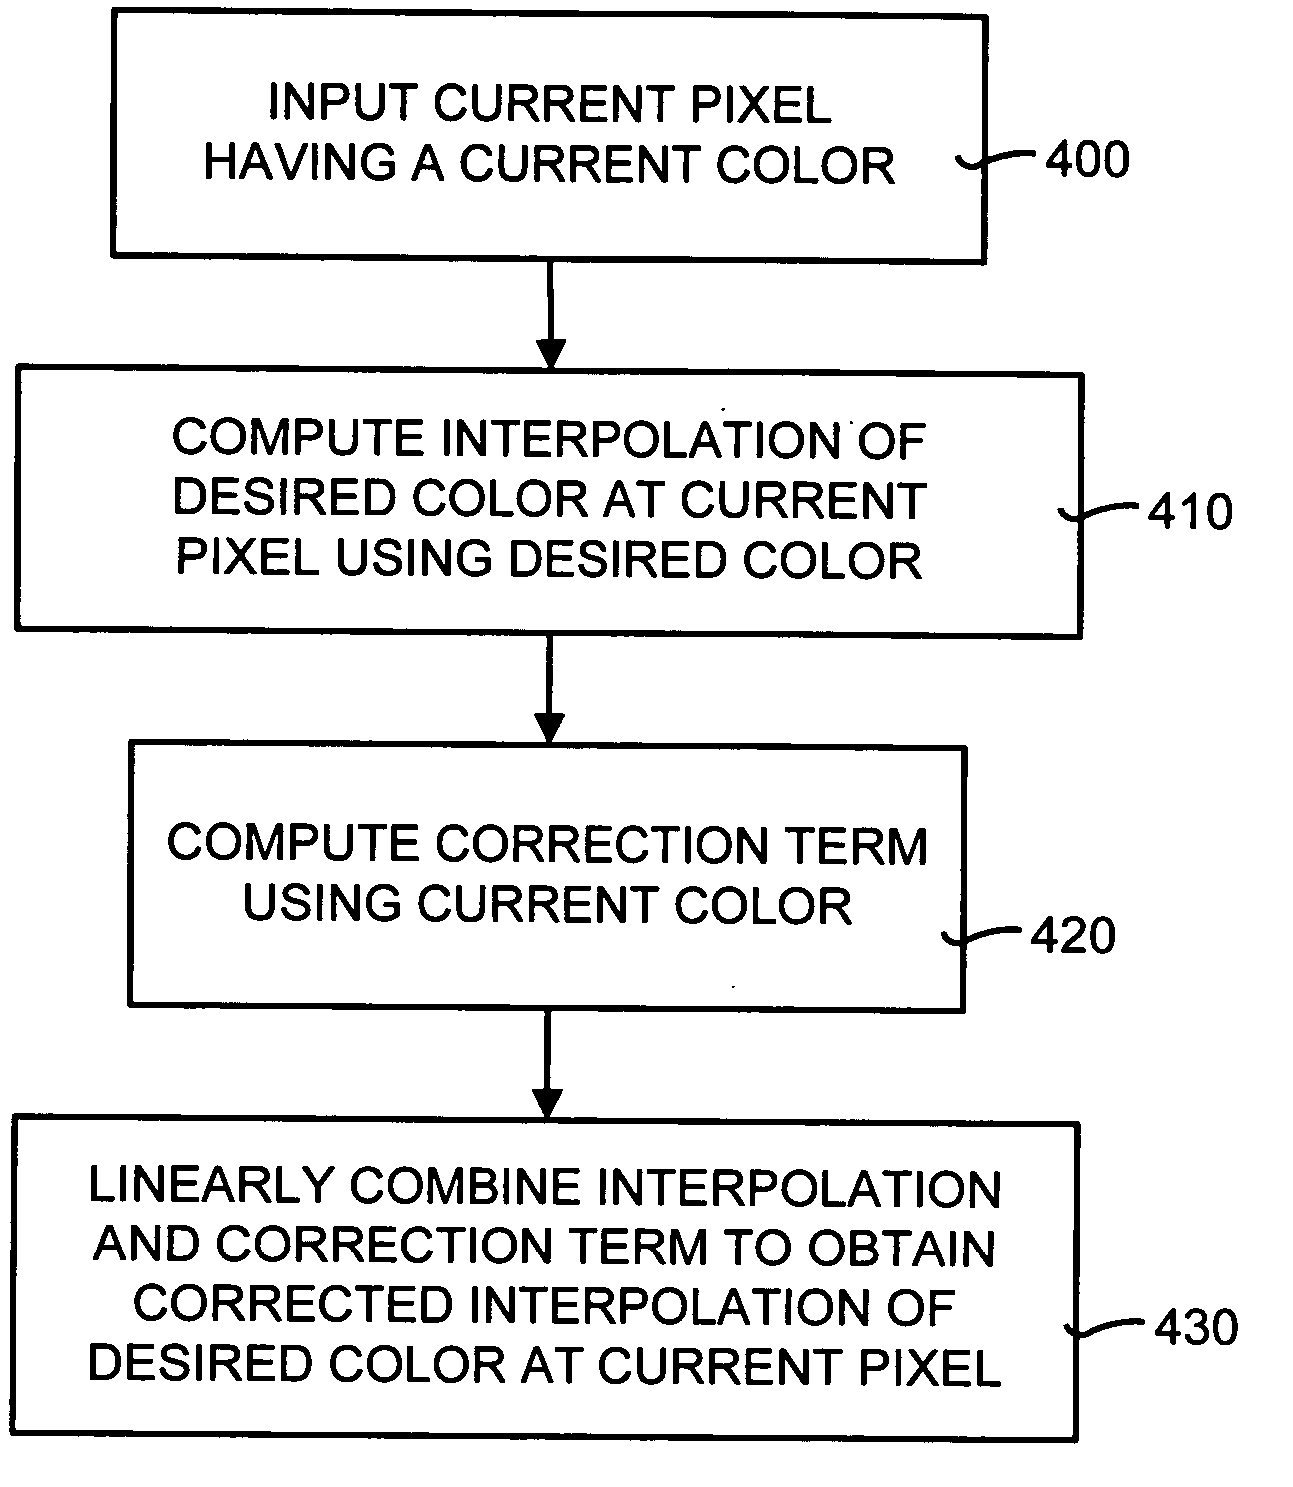 High-quality gradient-corrected linear interpolation for demosaicing of color images